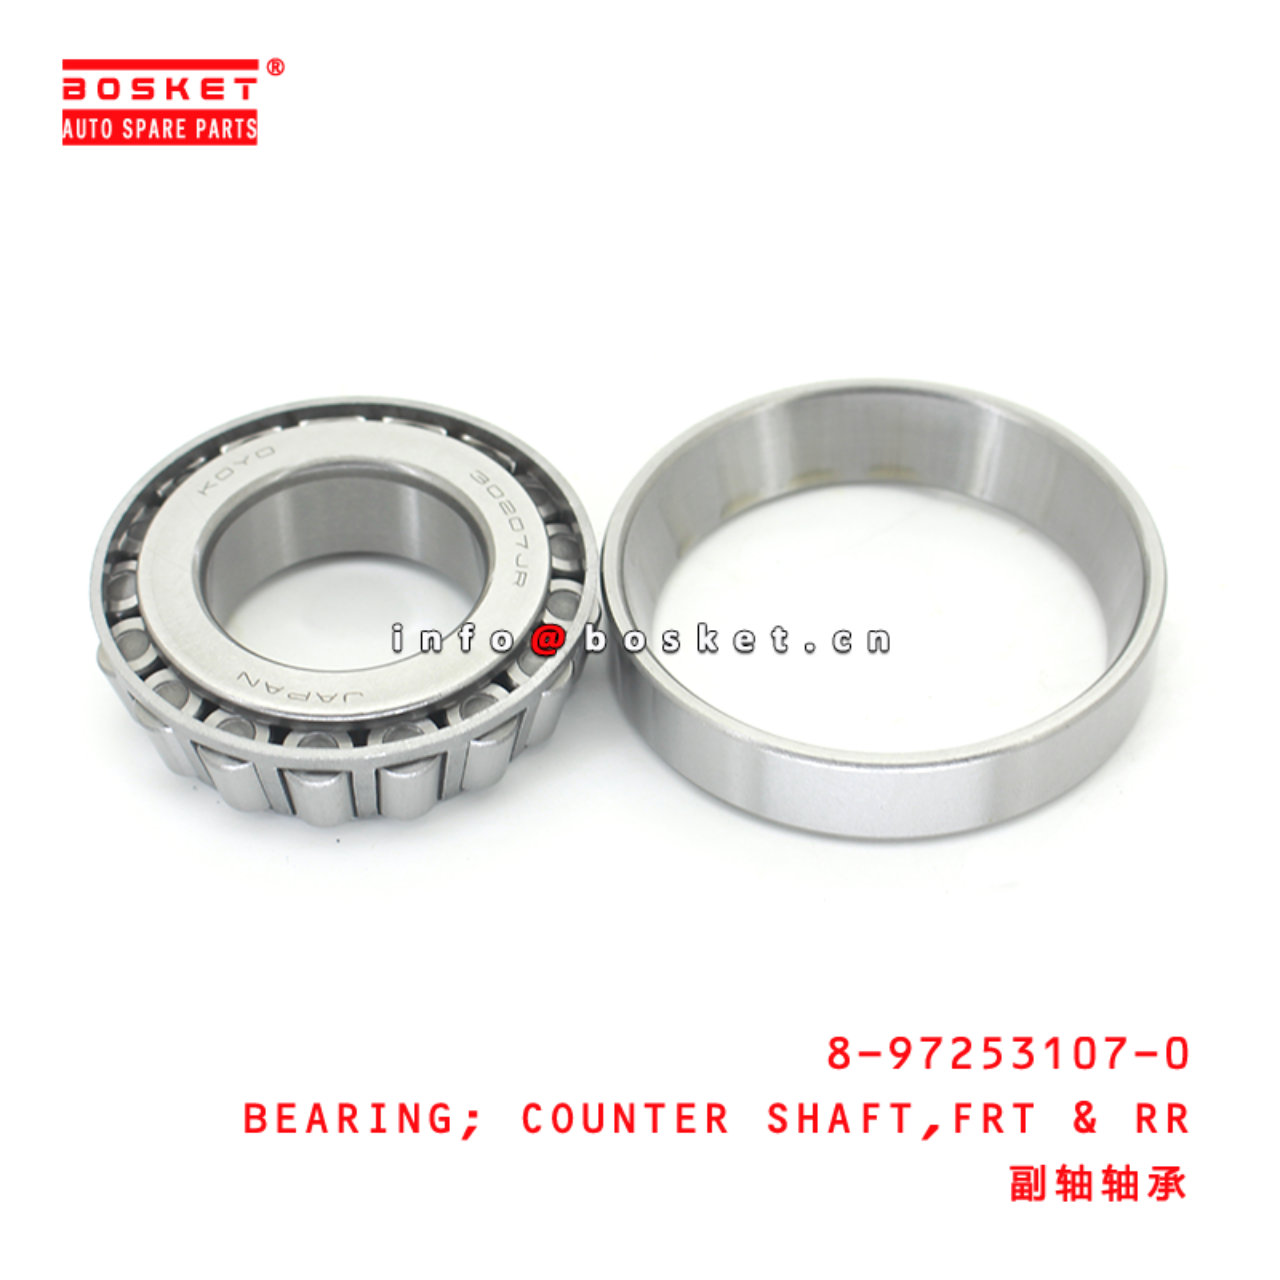 8-97253107-0 Front And Rear Counter Shaft Bearing suitable for ISUZU NQR71 4HG1 8972531070